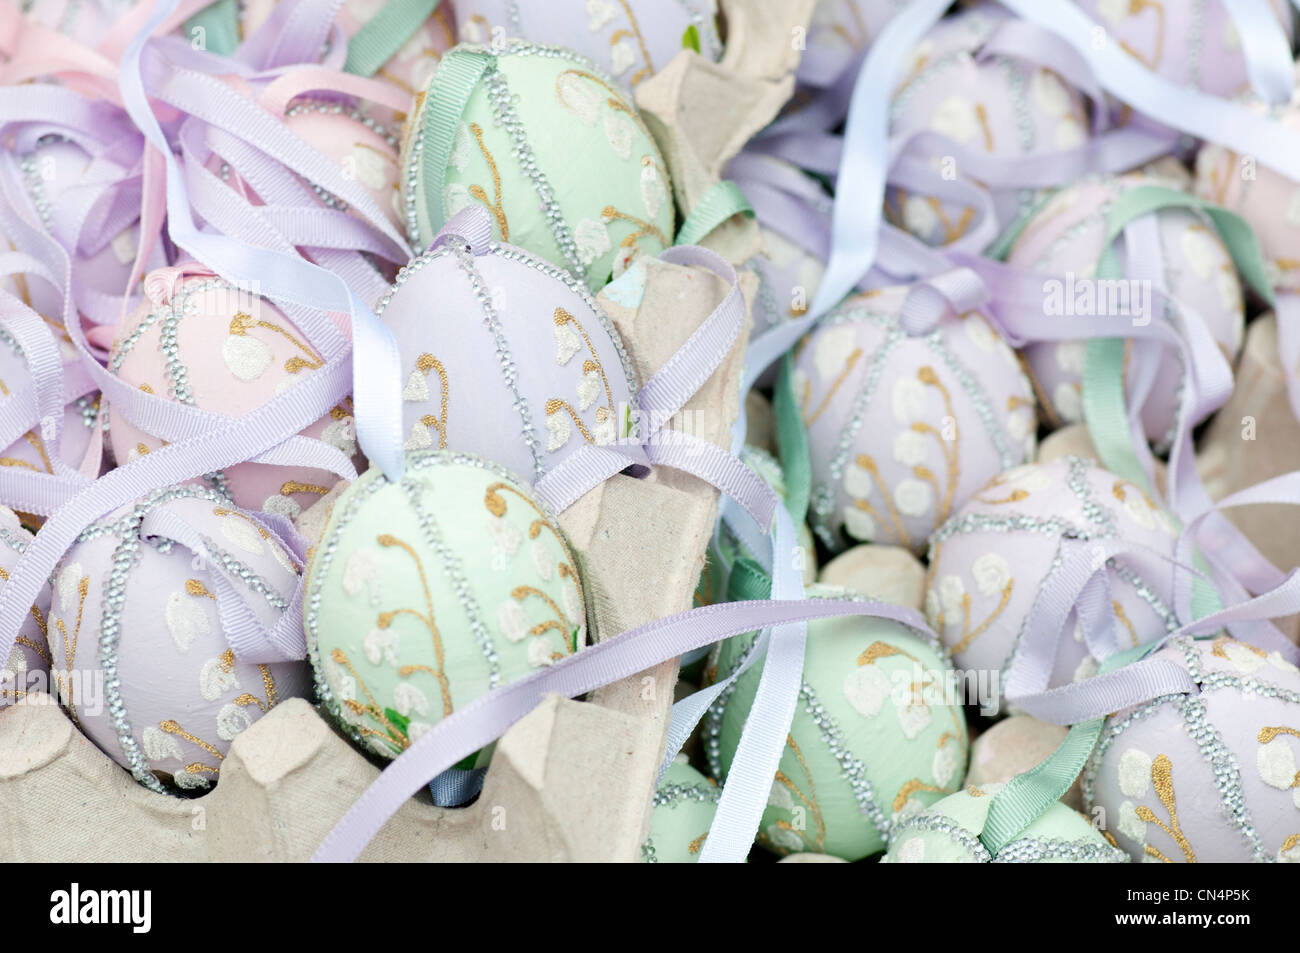 Hand-painted and hand decorated egg shells to celebrate Easter at the Old Vienna Easter Market at the Freyung, Vienna, Austria. Stock Photo